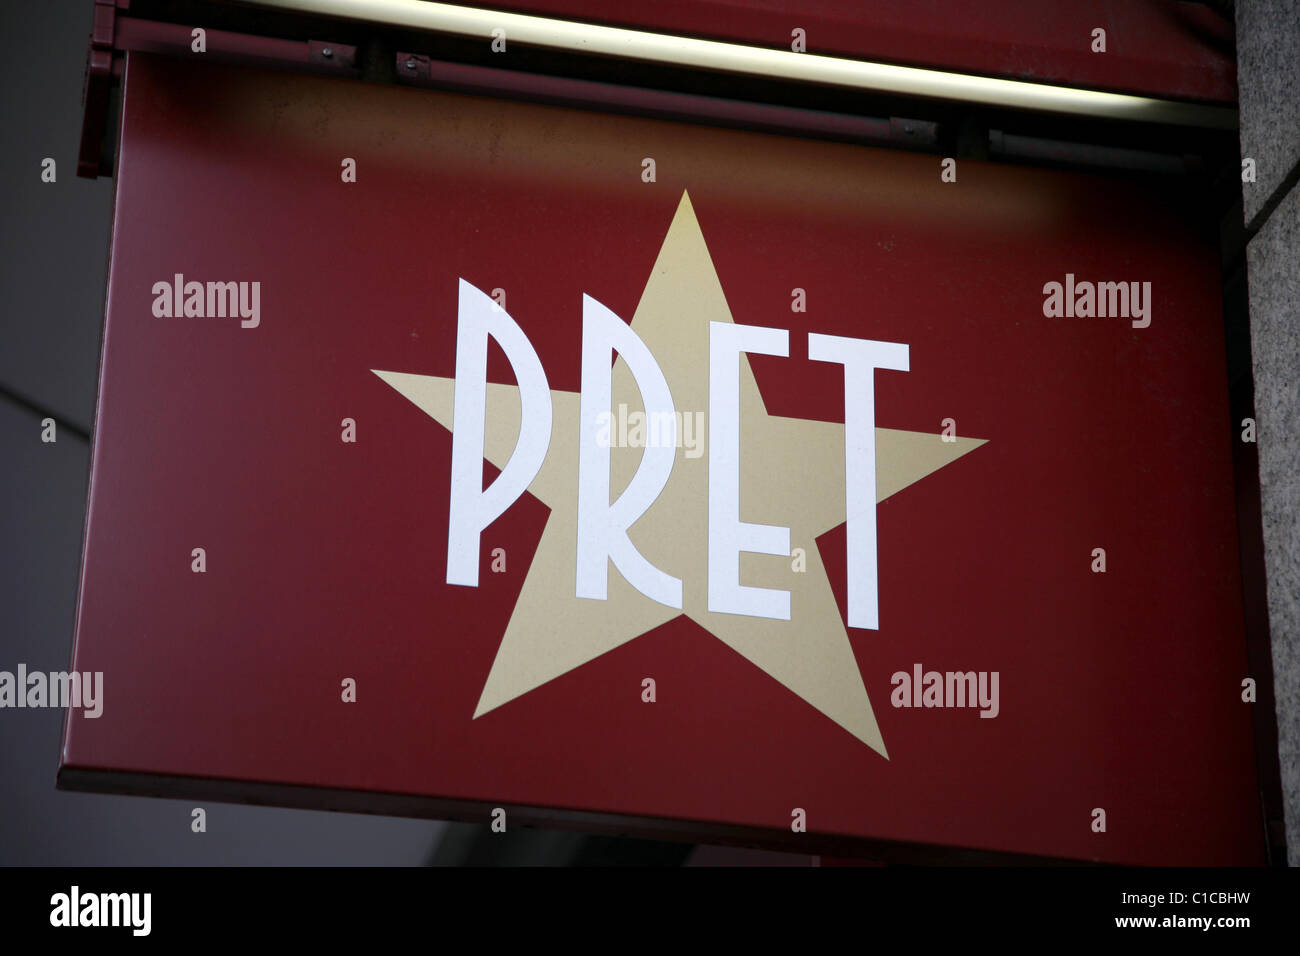 General View gv of the logo for Pret a Manger or Pret-a-manger in London, England. Stock Photo